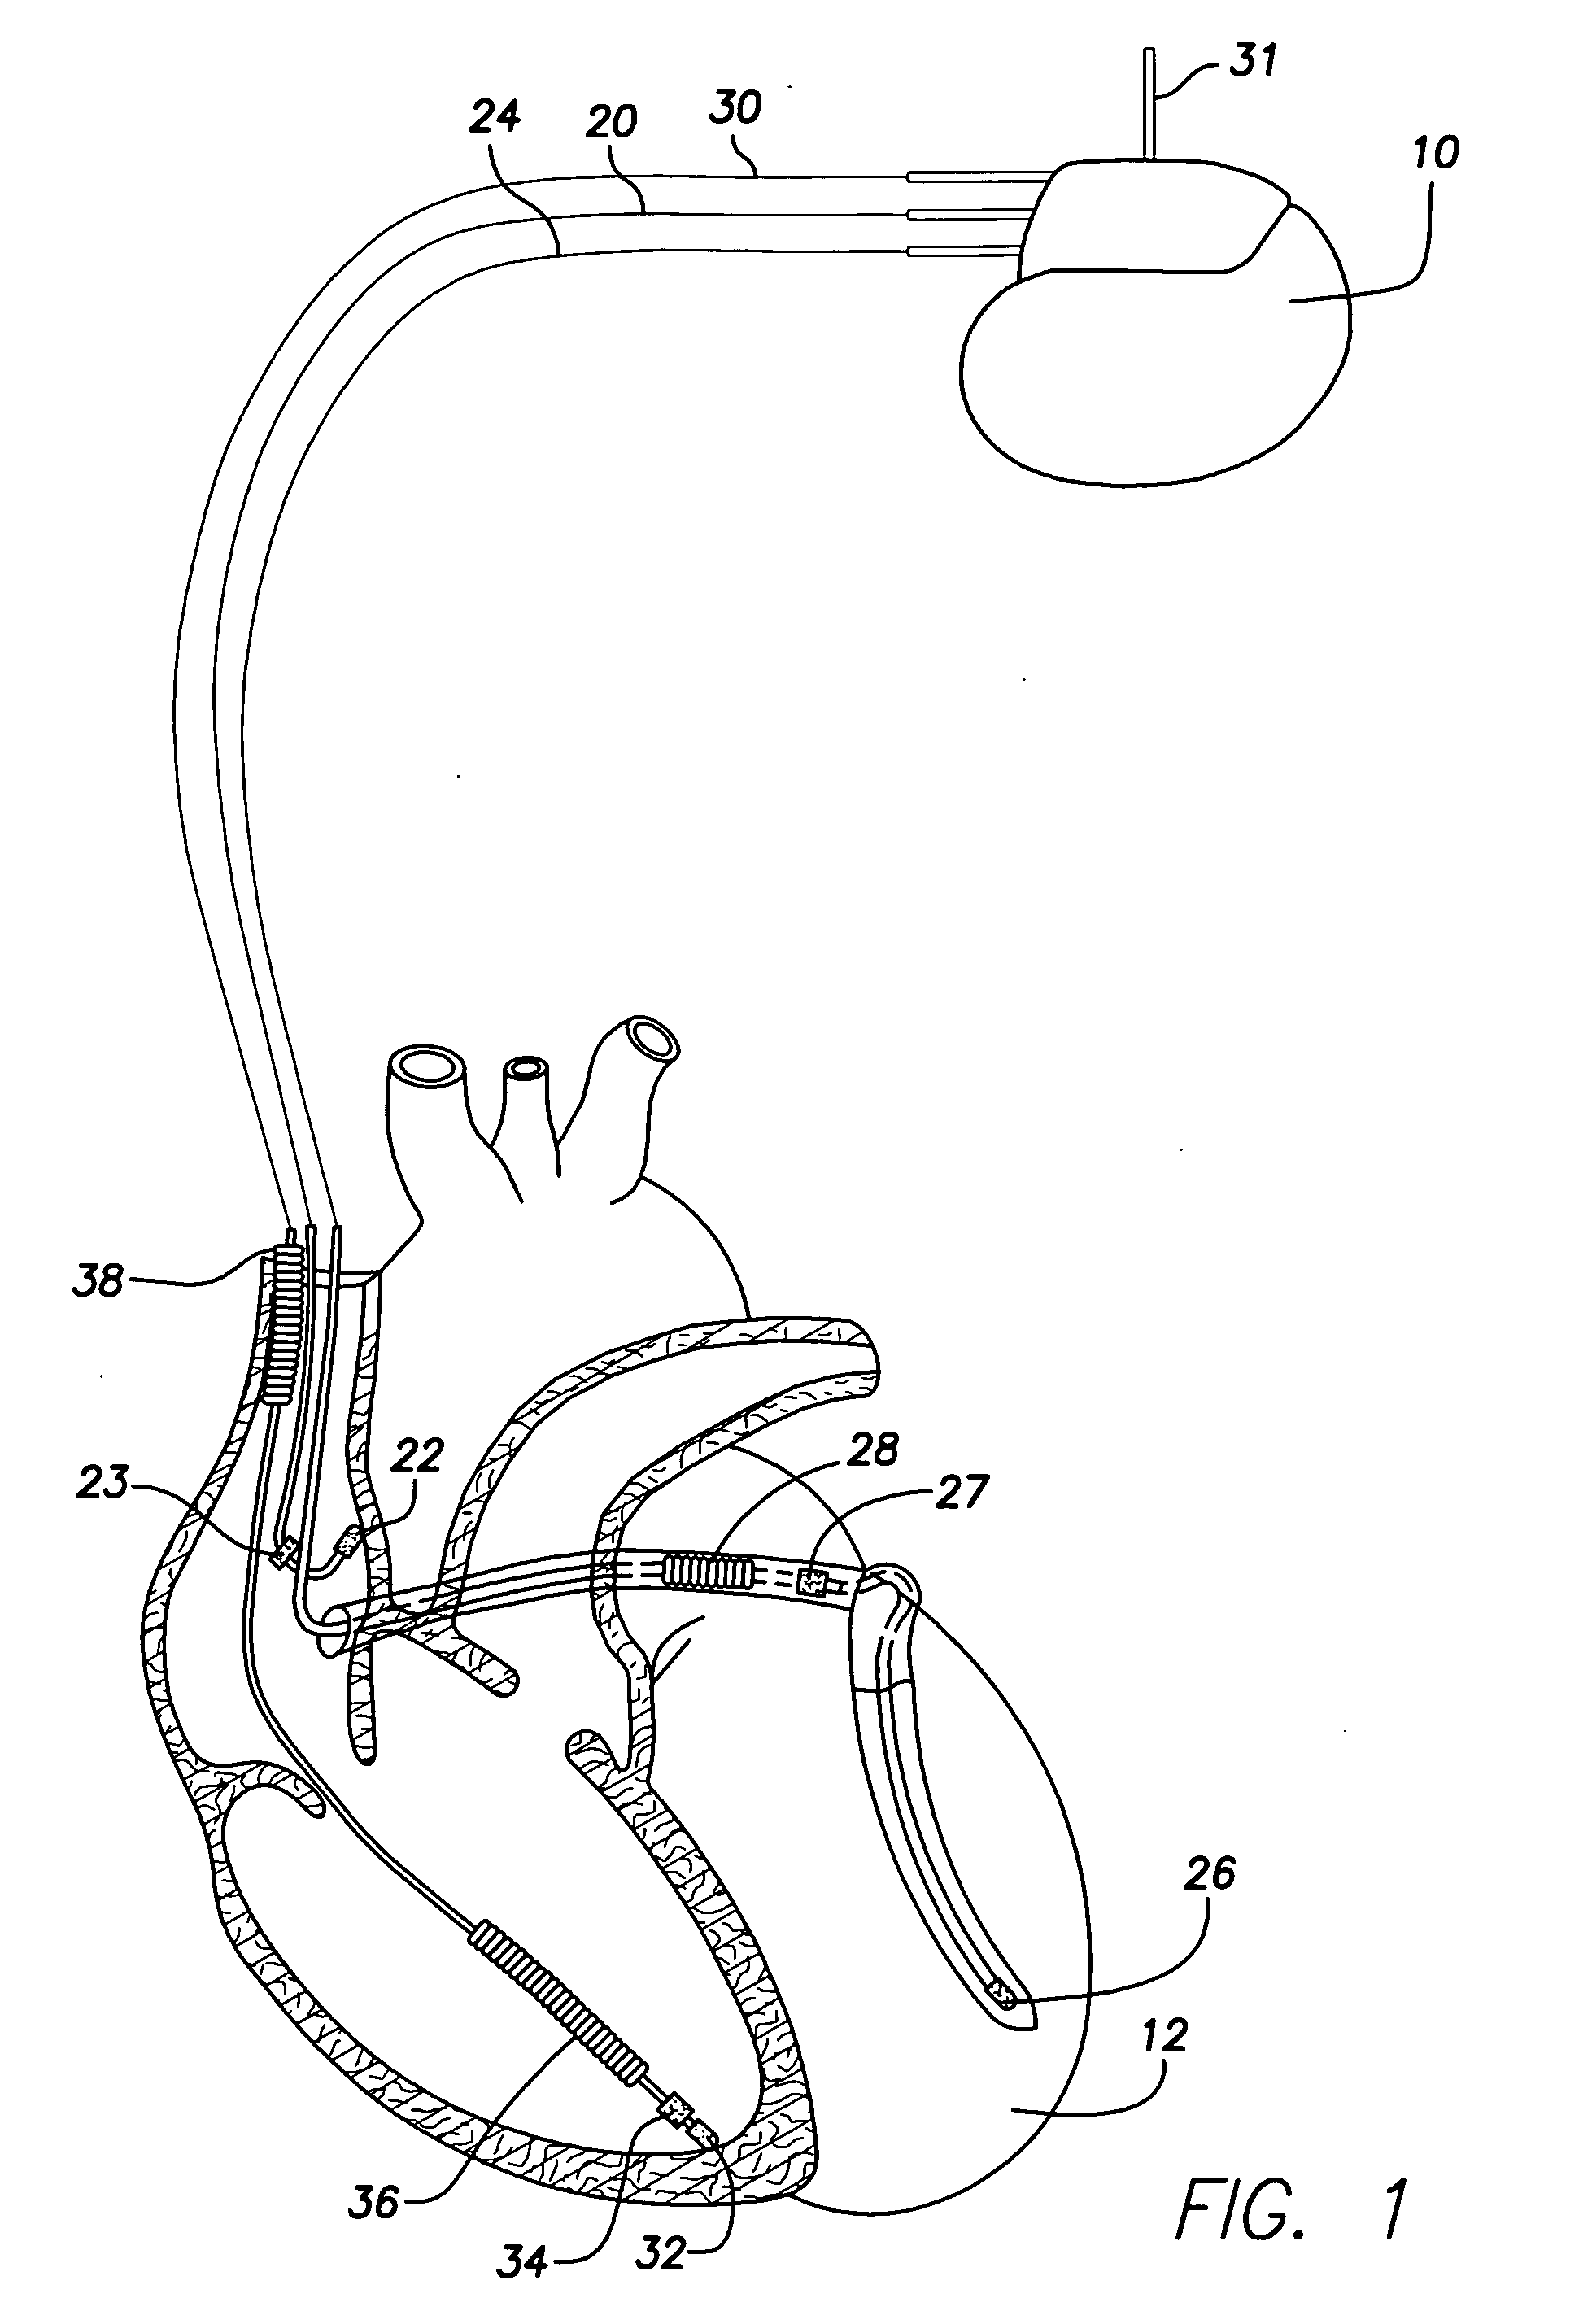 System and method for distinguishing between hypoglycemia and hyperglycemia using an implantable medical device